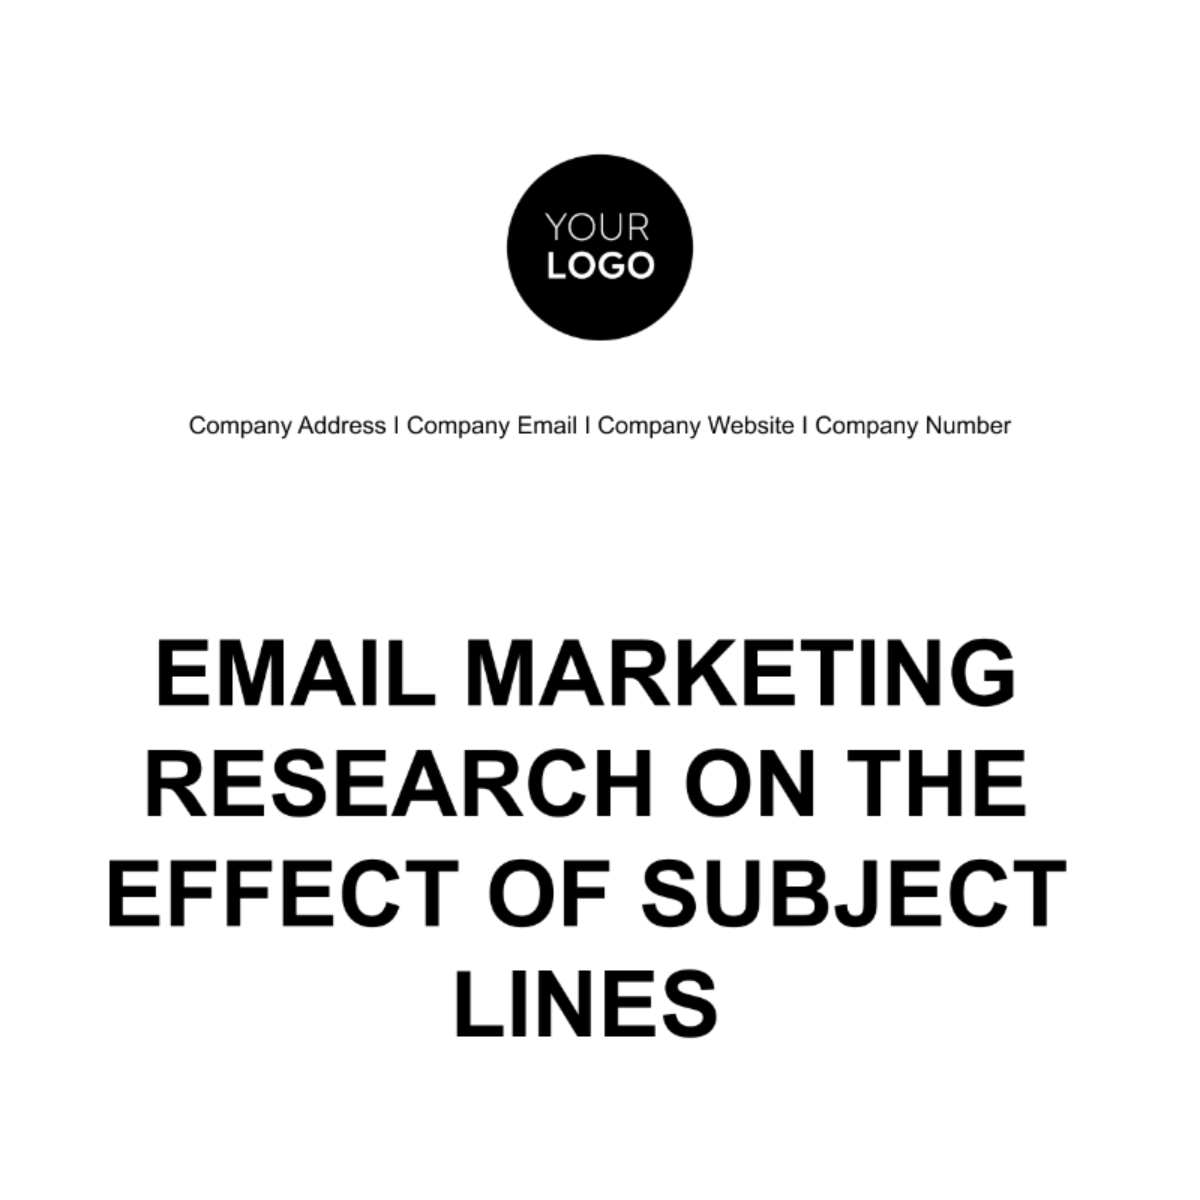 Free Email Marketing Research on the Effect of Subject Lines Template